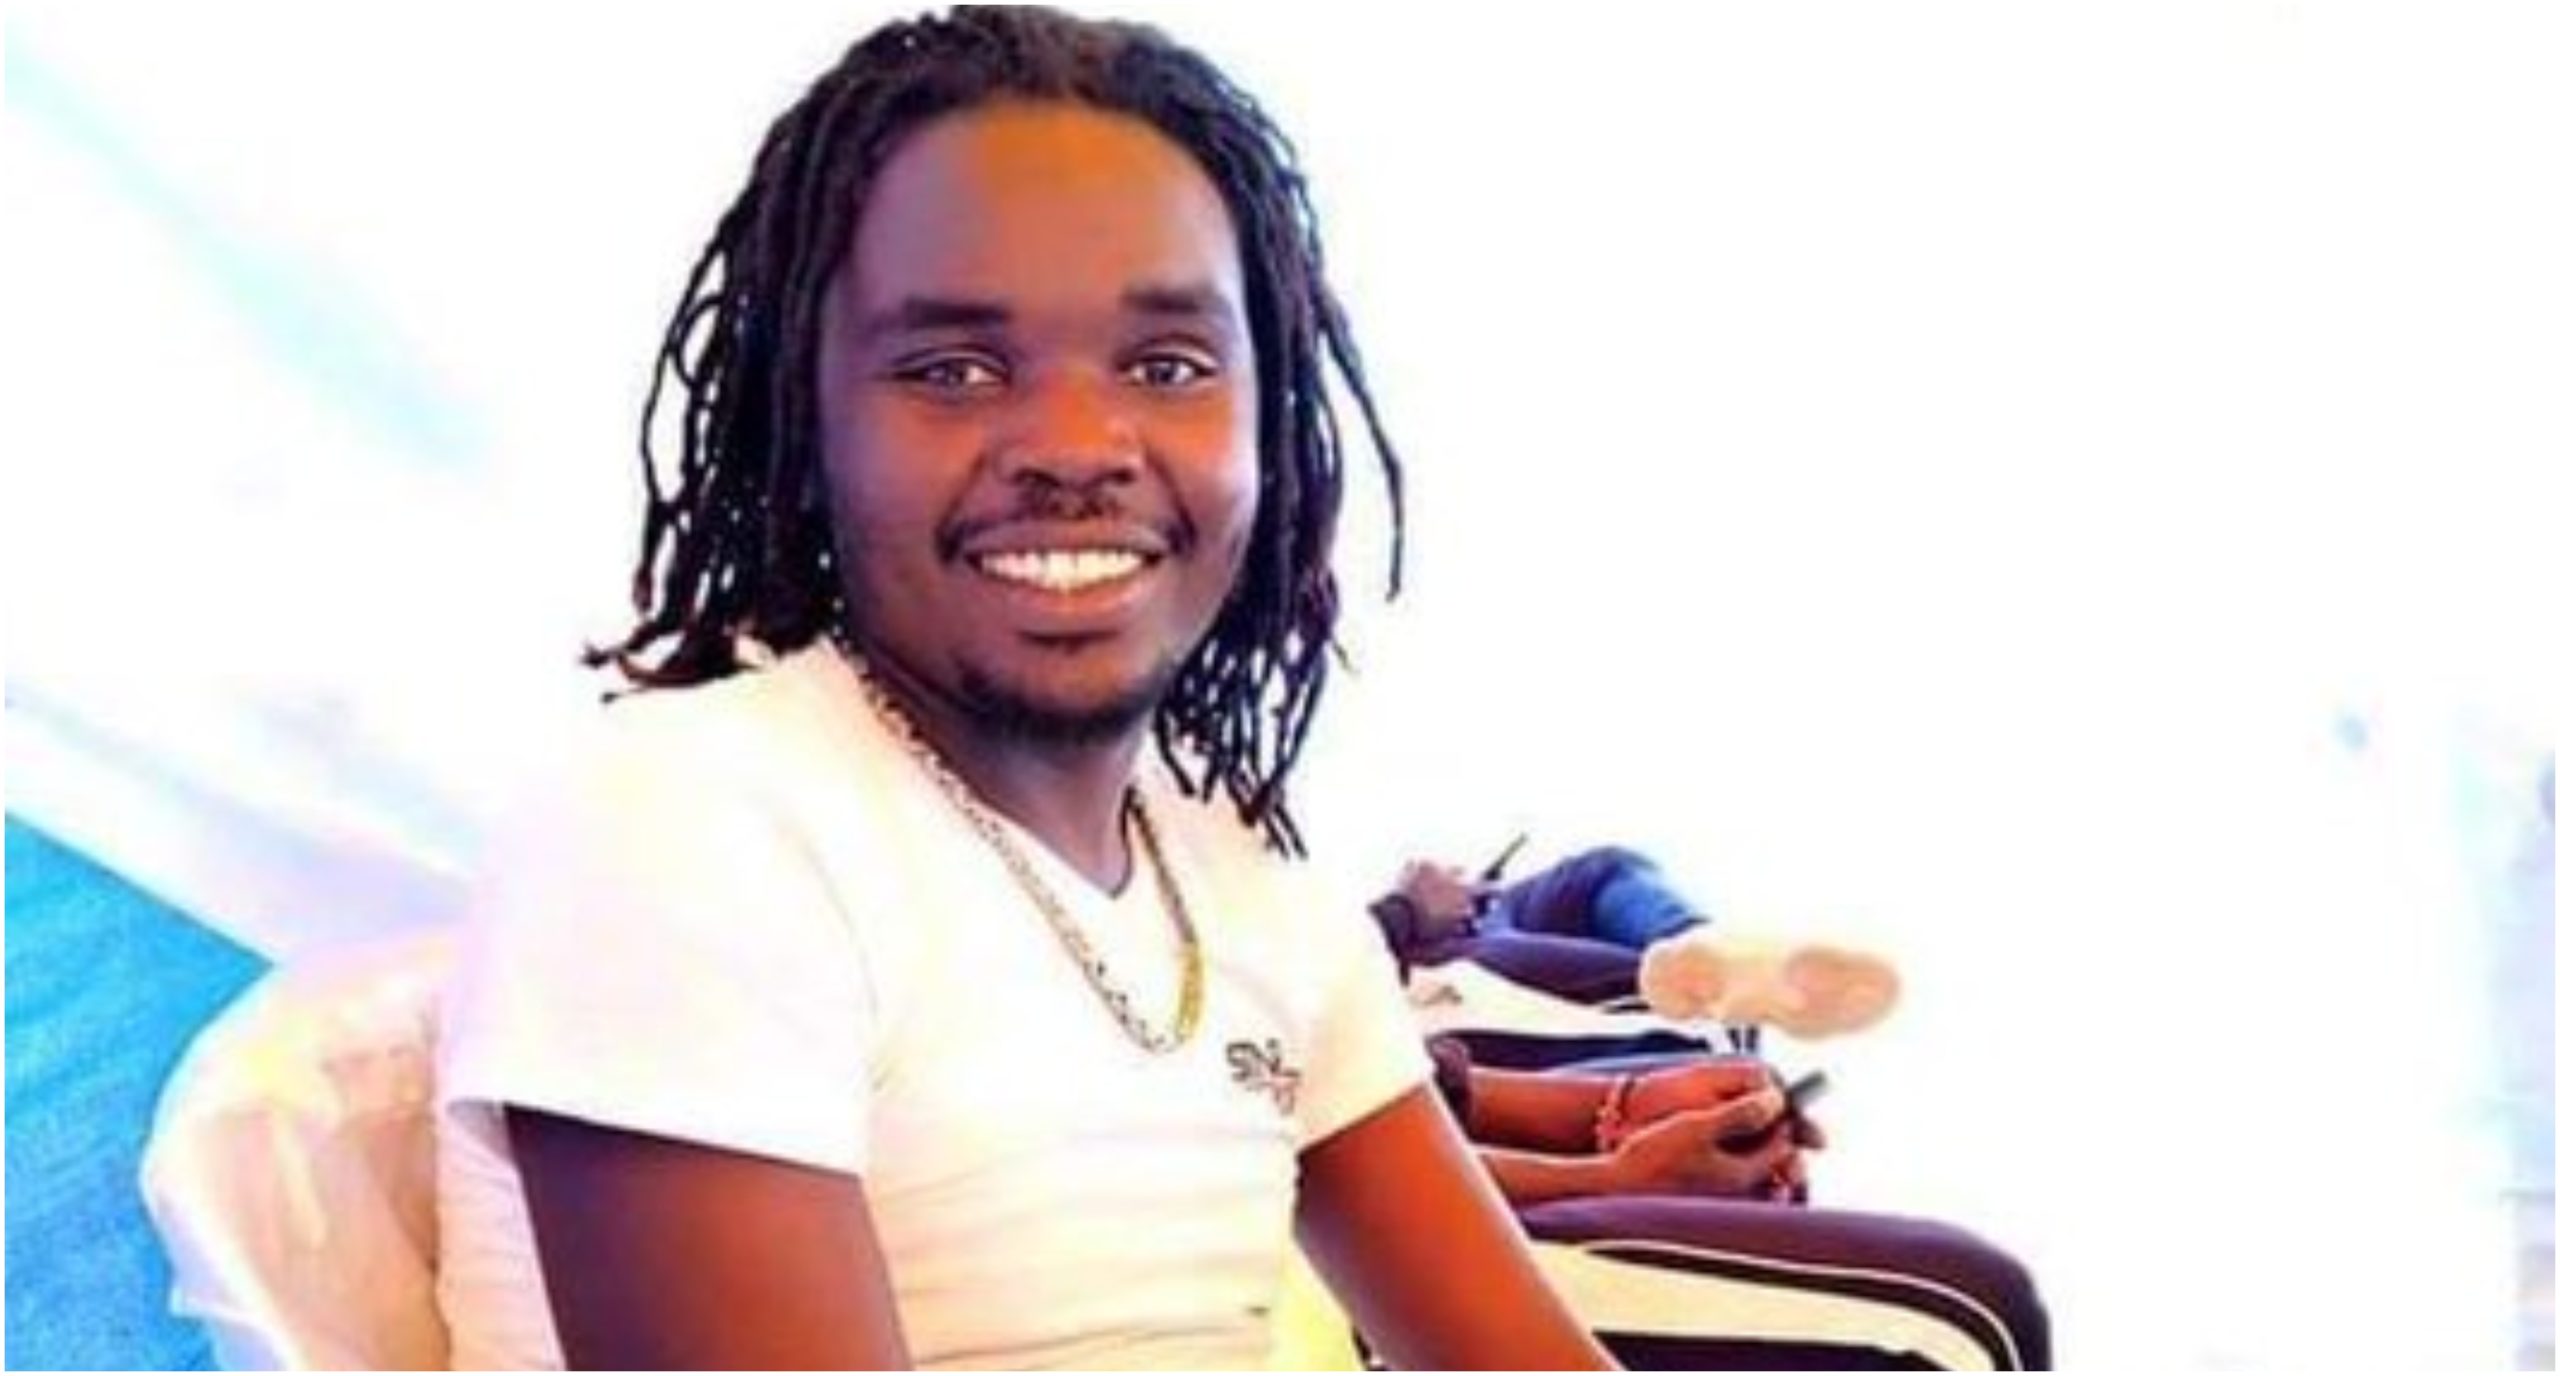 Popular Kenyan musician dies in grisly road accident (Photos)